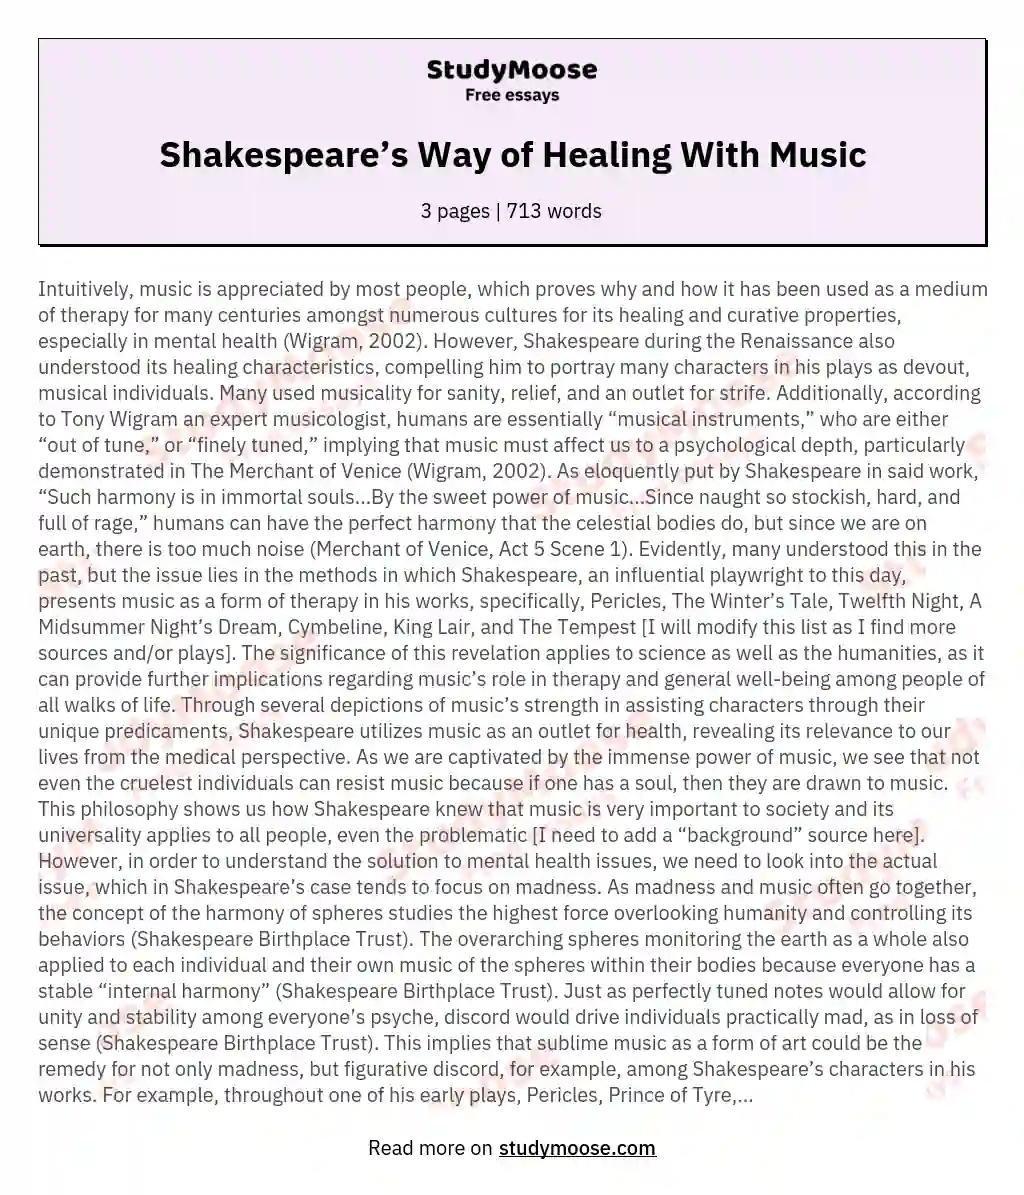 Shakespeare’s Way of Healing With Music essay